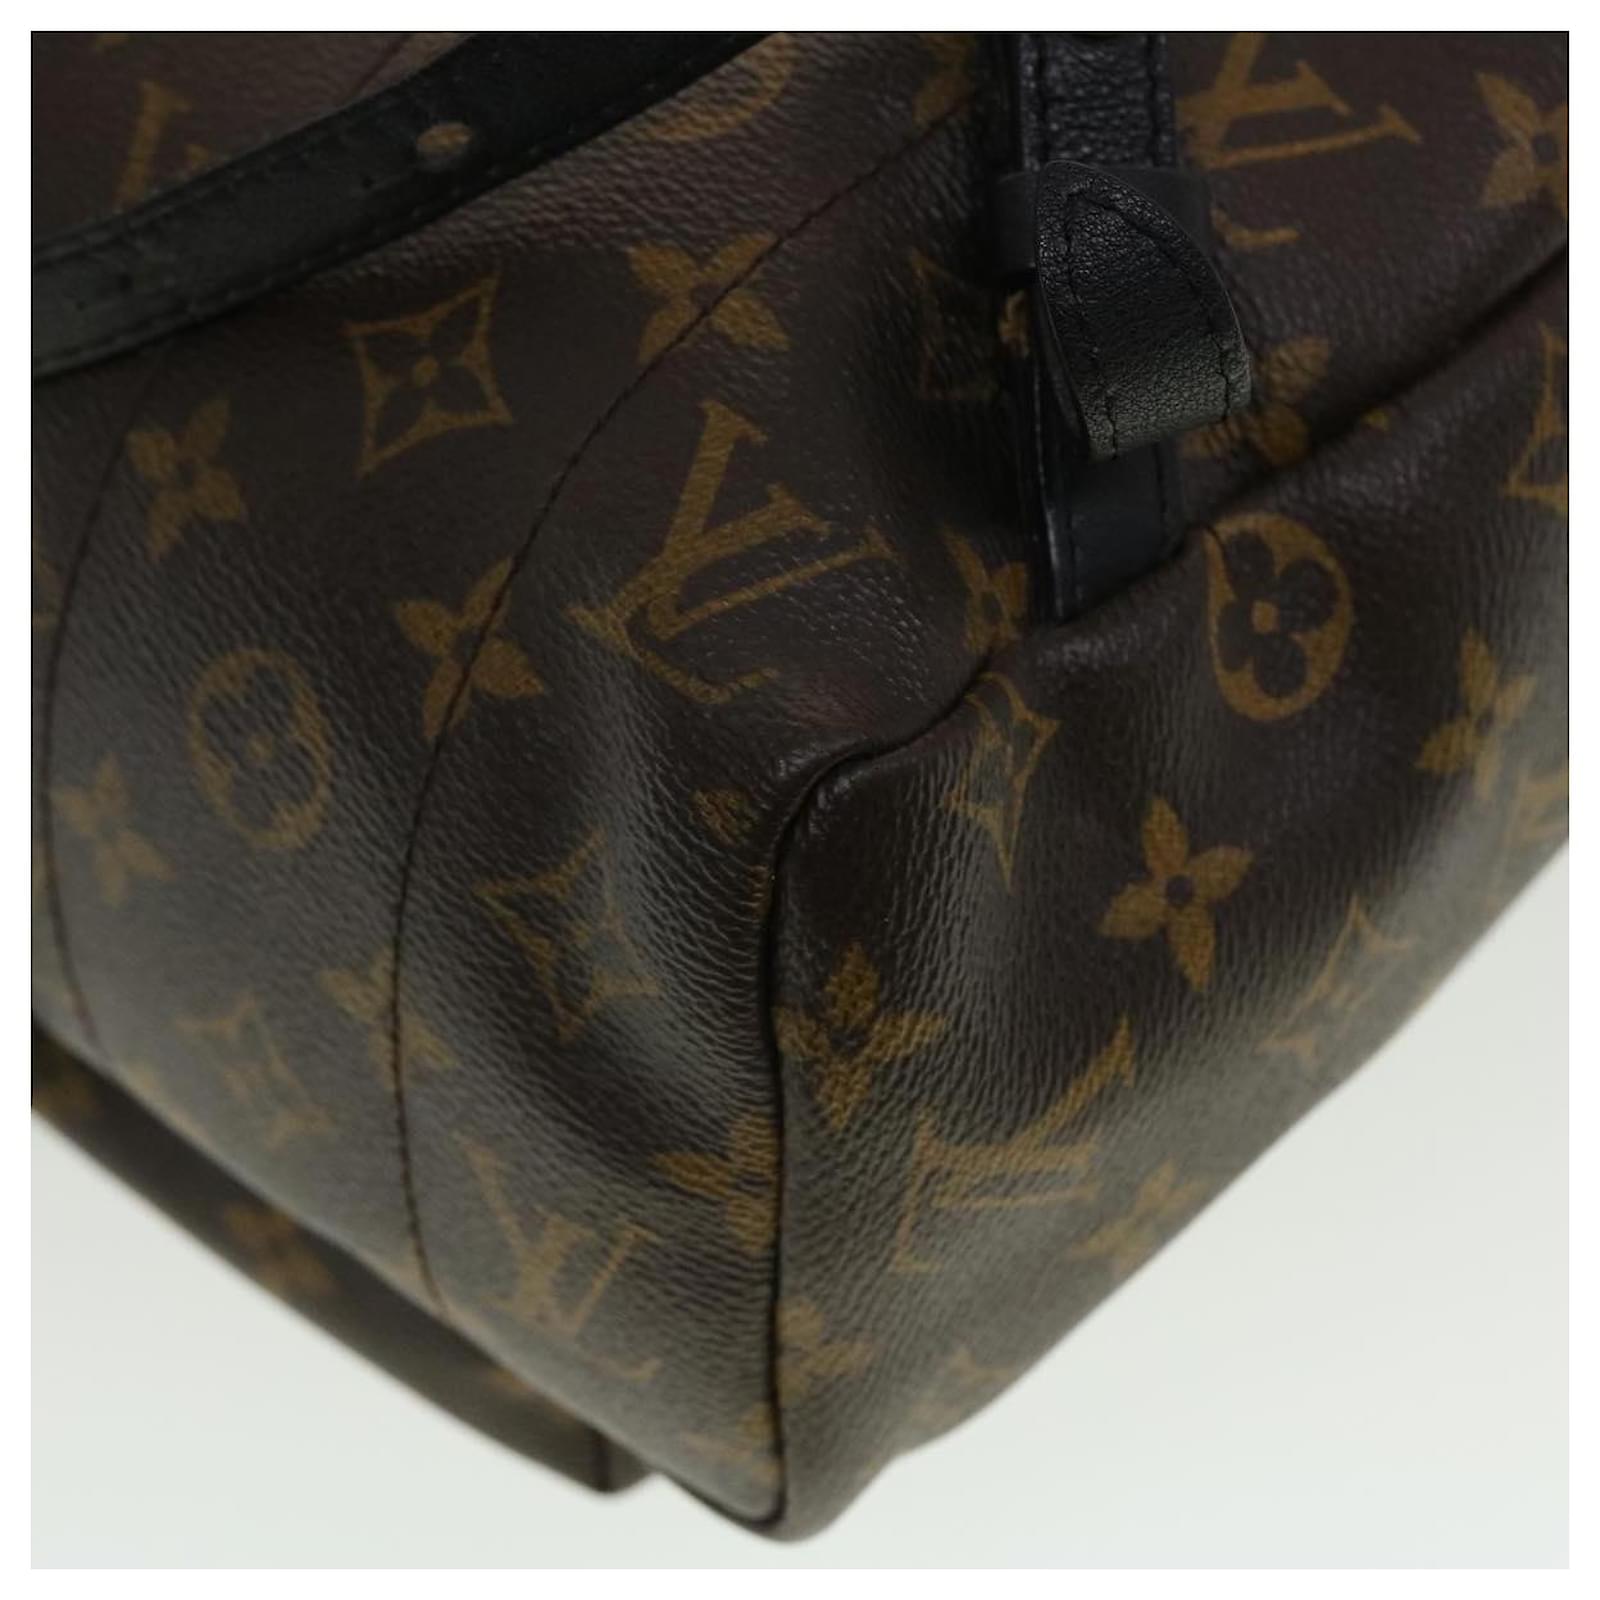 LOUIS VUITTON Monogram Palm Springs MM Backpack M44874 LV Auth 38537